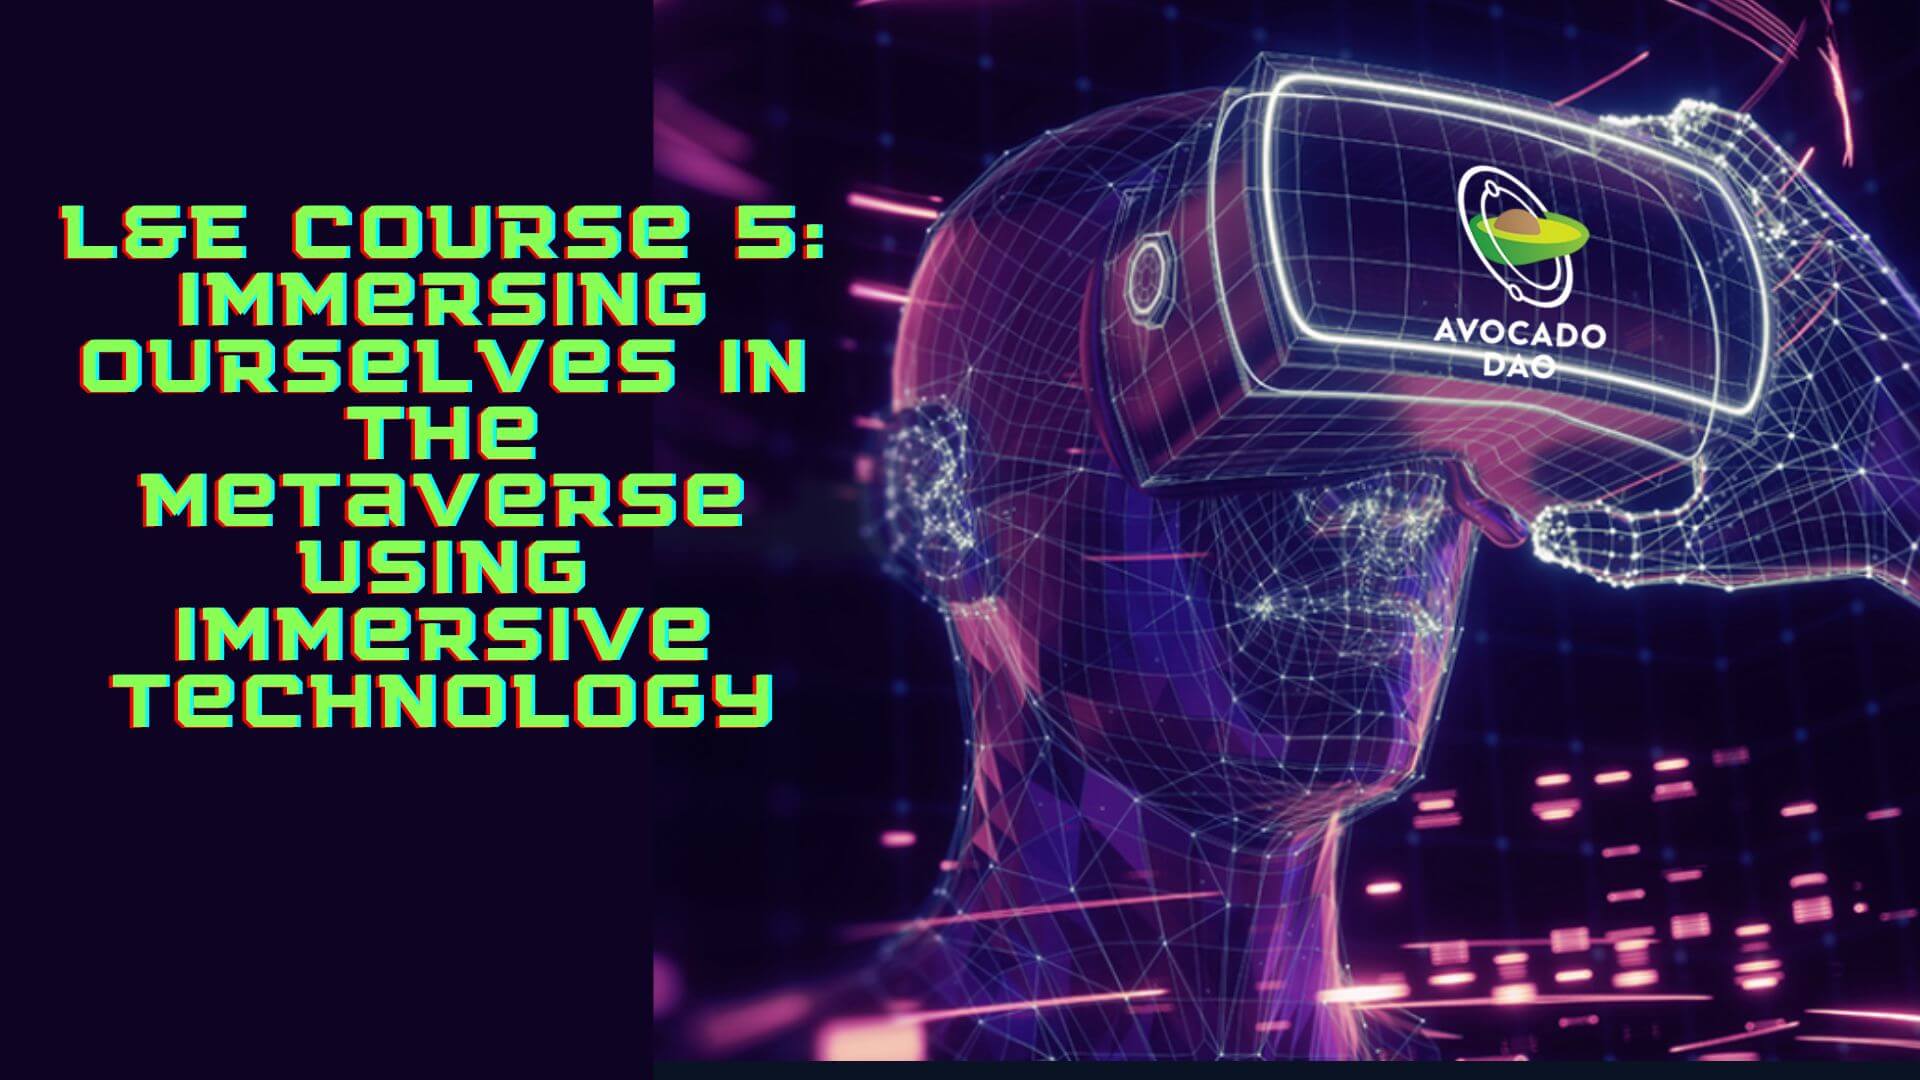 Web3 L&E Course #5: Immersing ourselves in the Metaverse using immersive technology